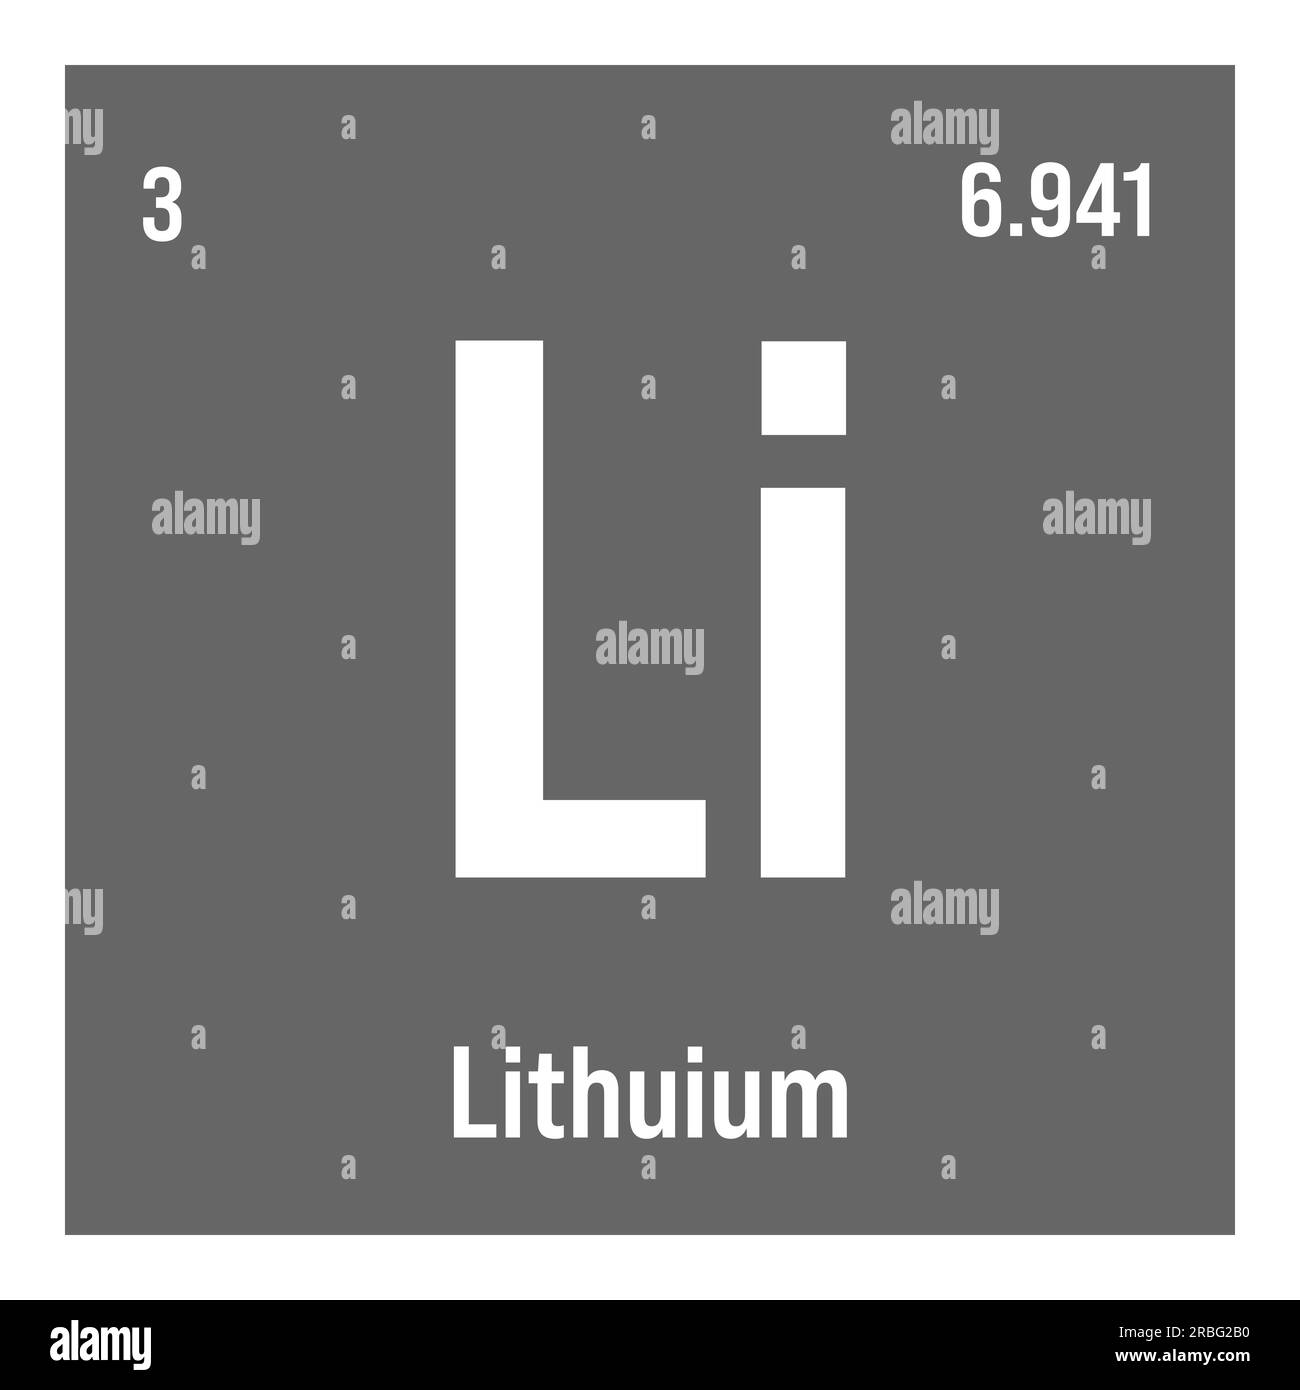 Lithium, Li, periodic table element with name, symbol, atomic number and weight. Alkali metal with various industrial uses, such as in batteries, ceramics, and as a medication for bipolar disorder. Stock Vector